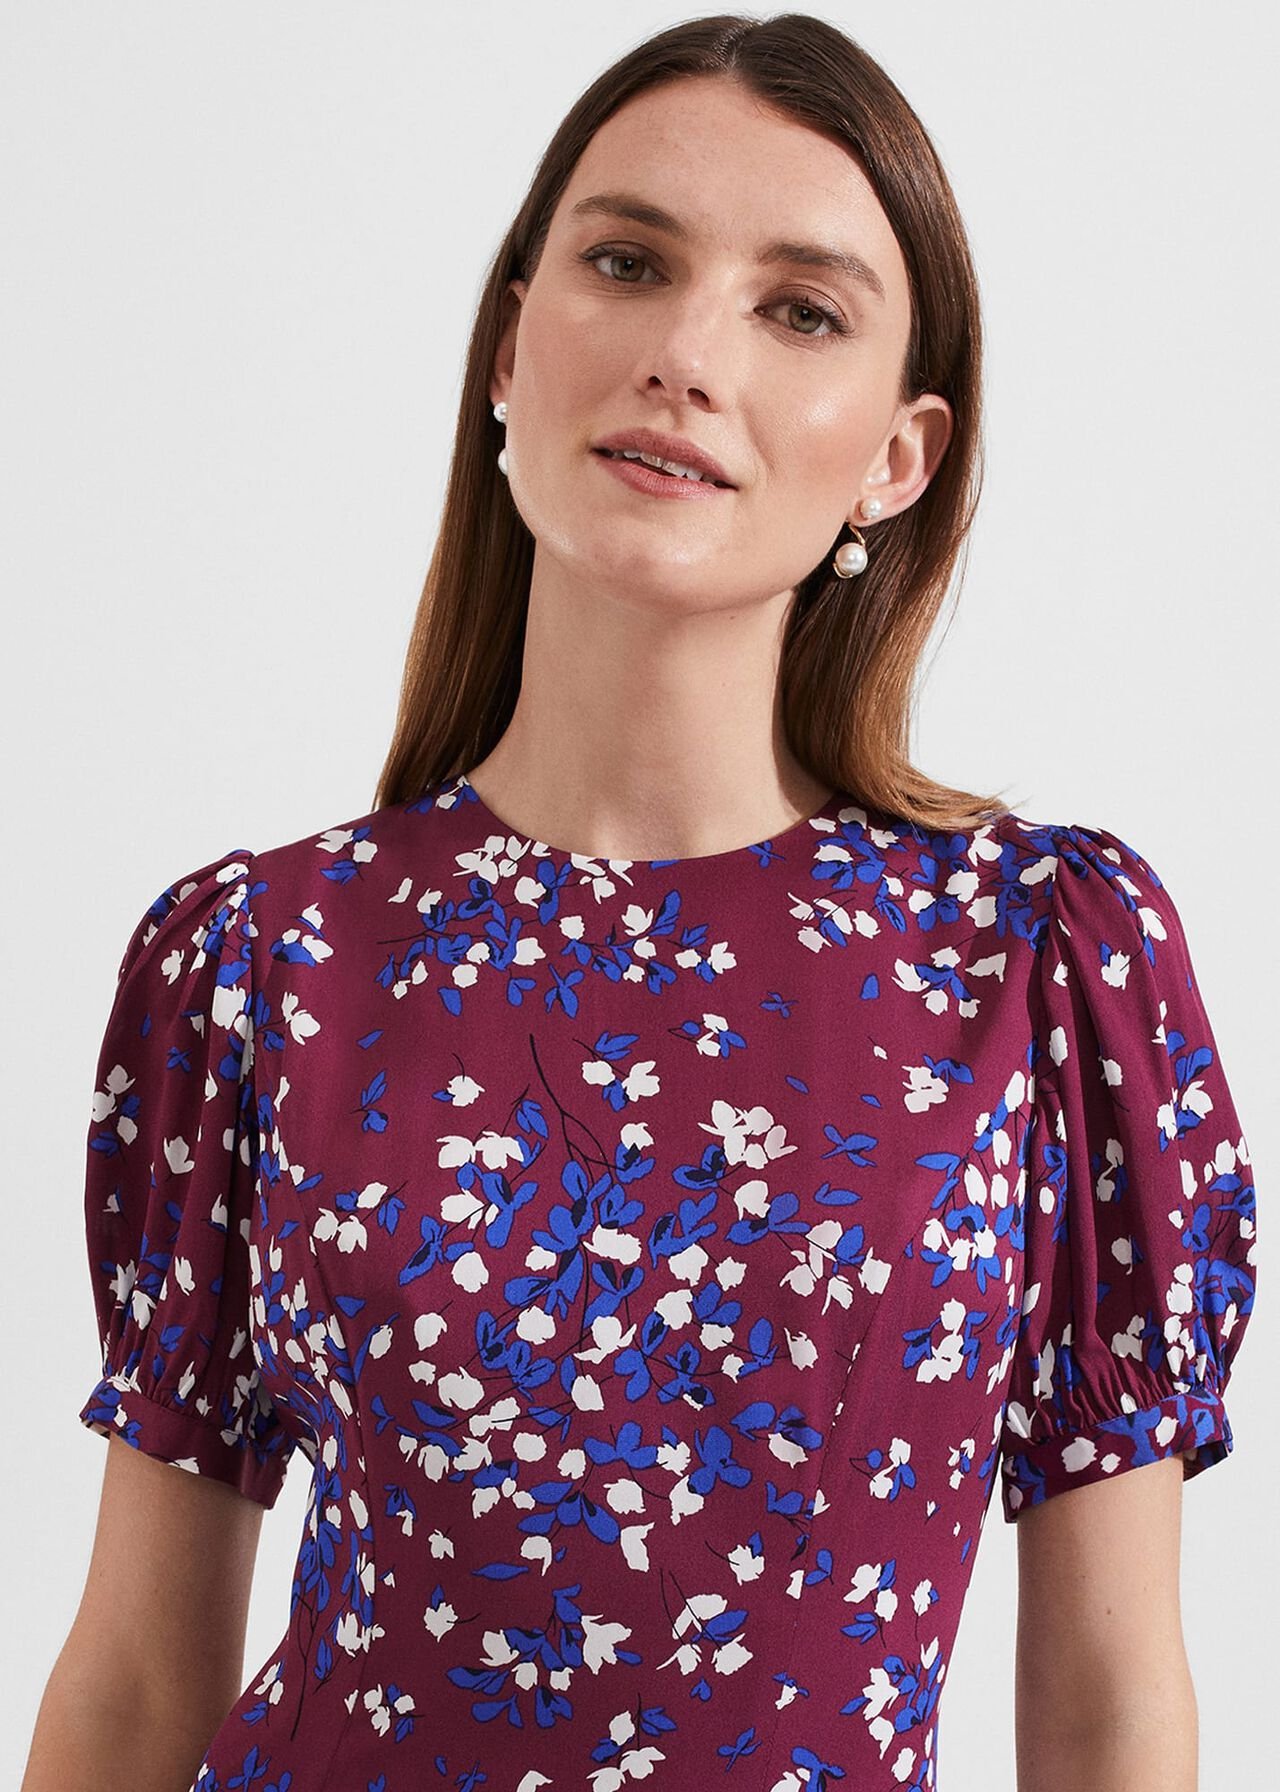 Rochelle Floral Fit And Flare Dress, Purple Multi, hi-res